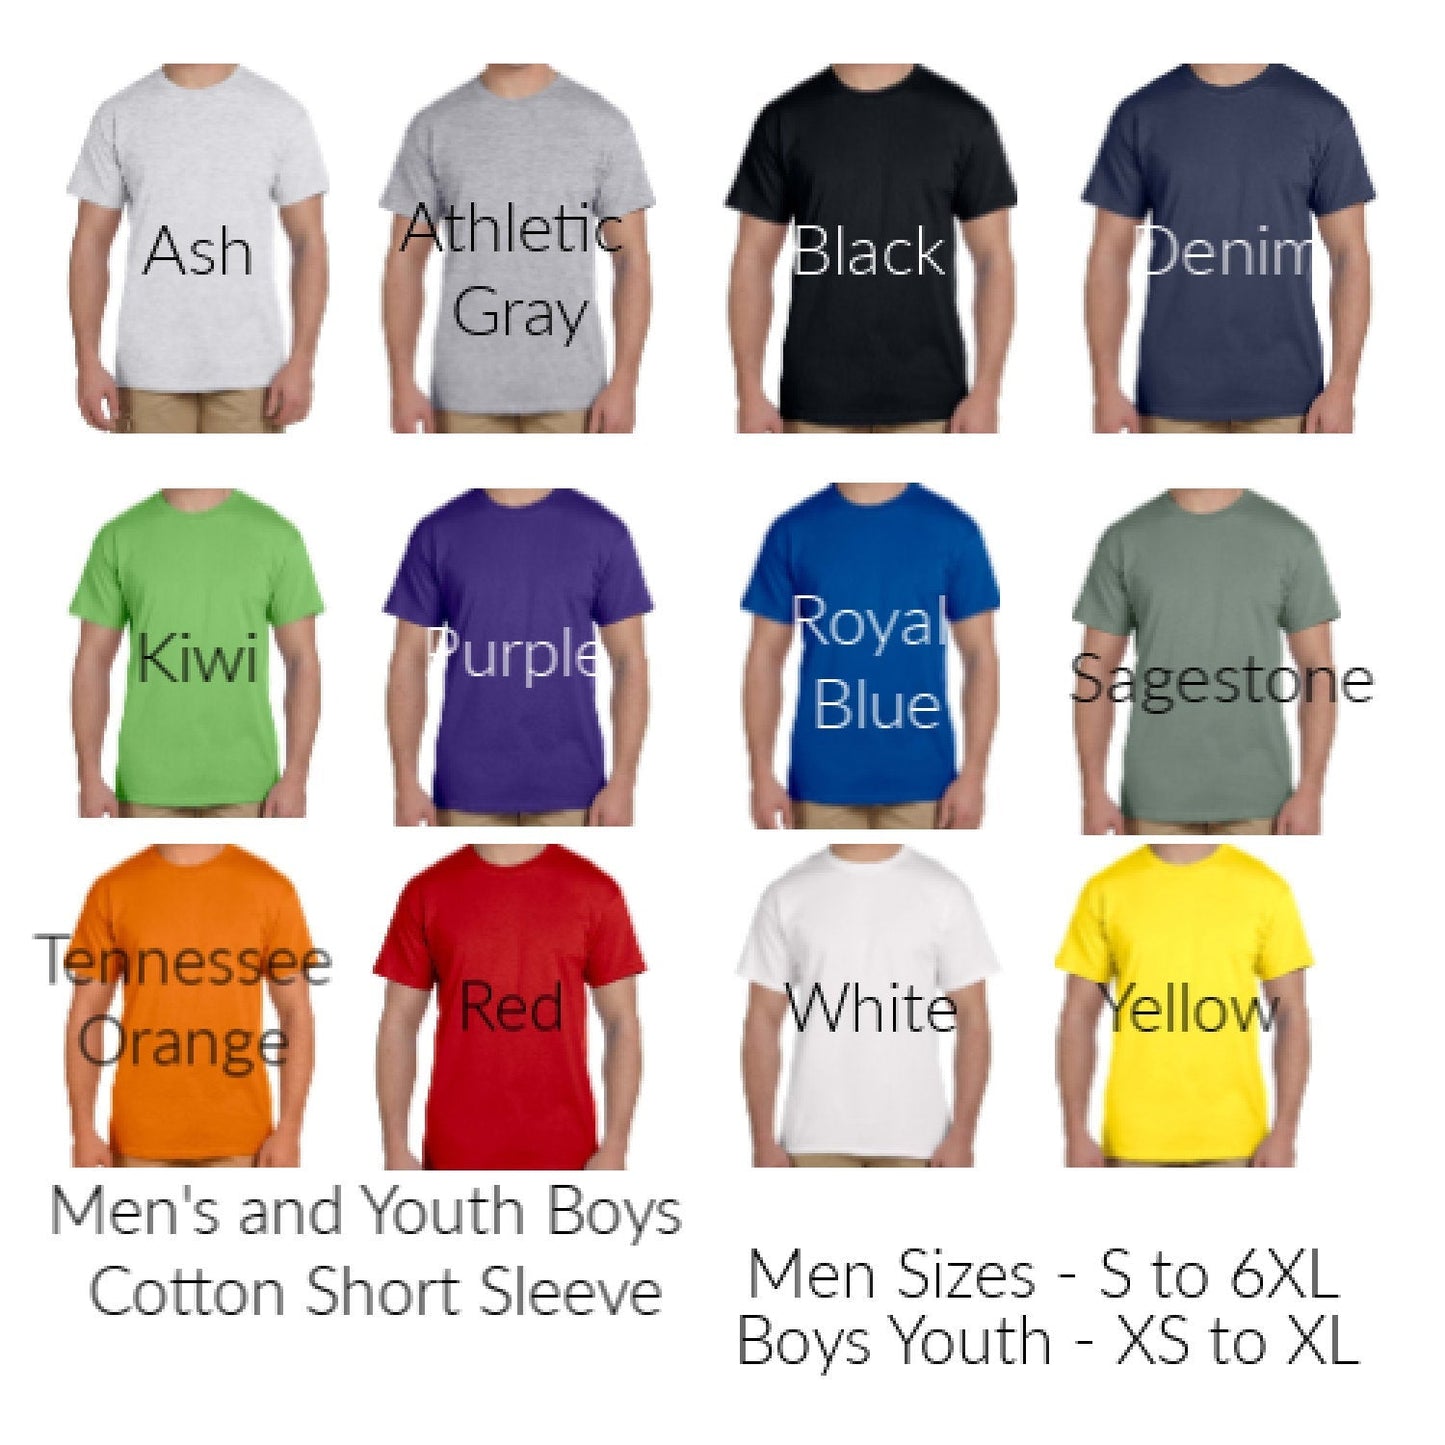 Customize your own T-Shirt - Boys Youth Short Sleeve Tee